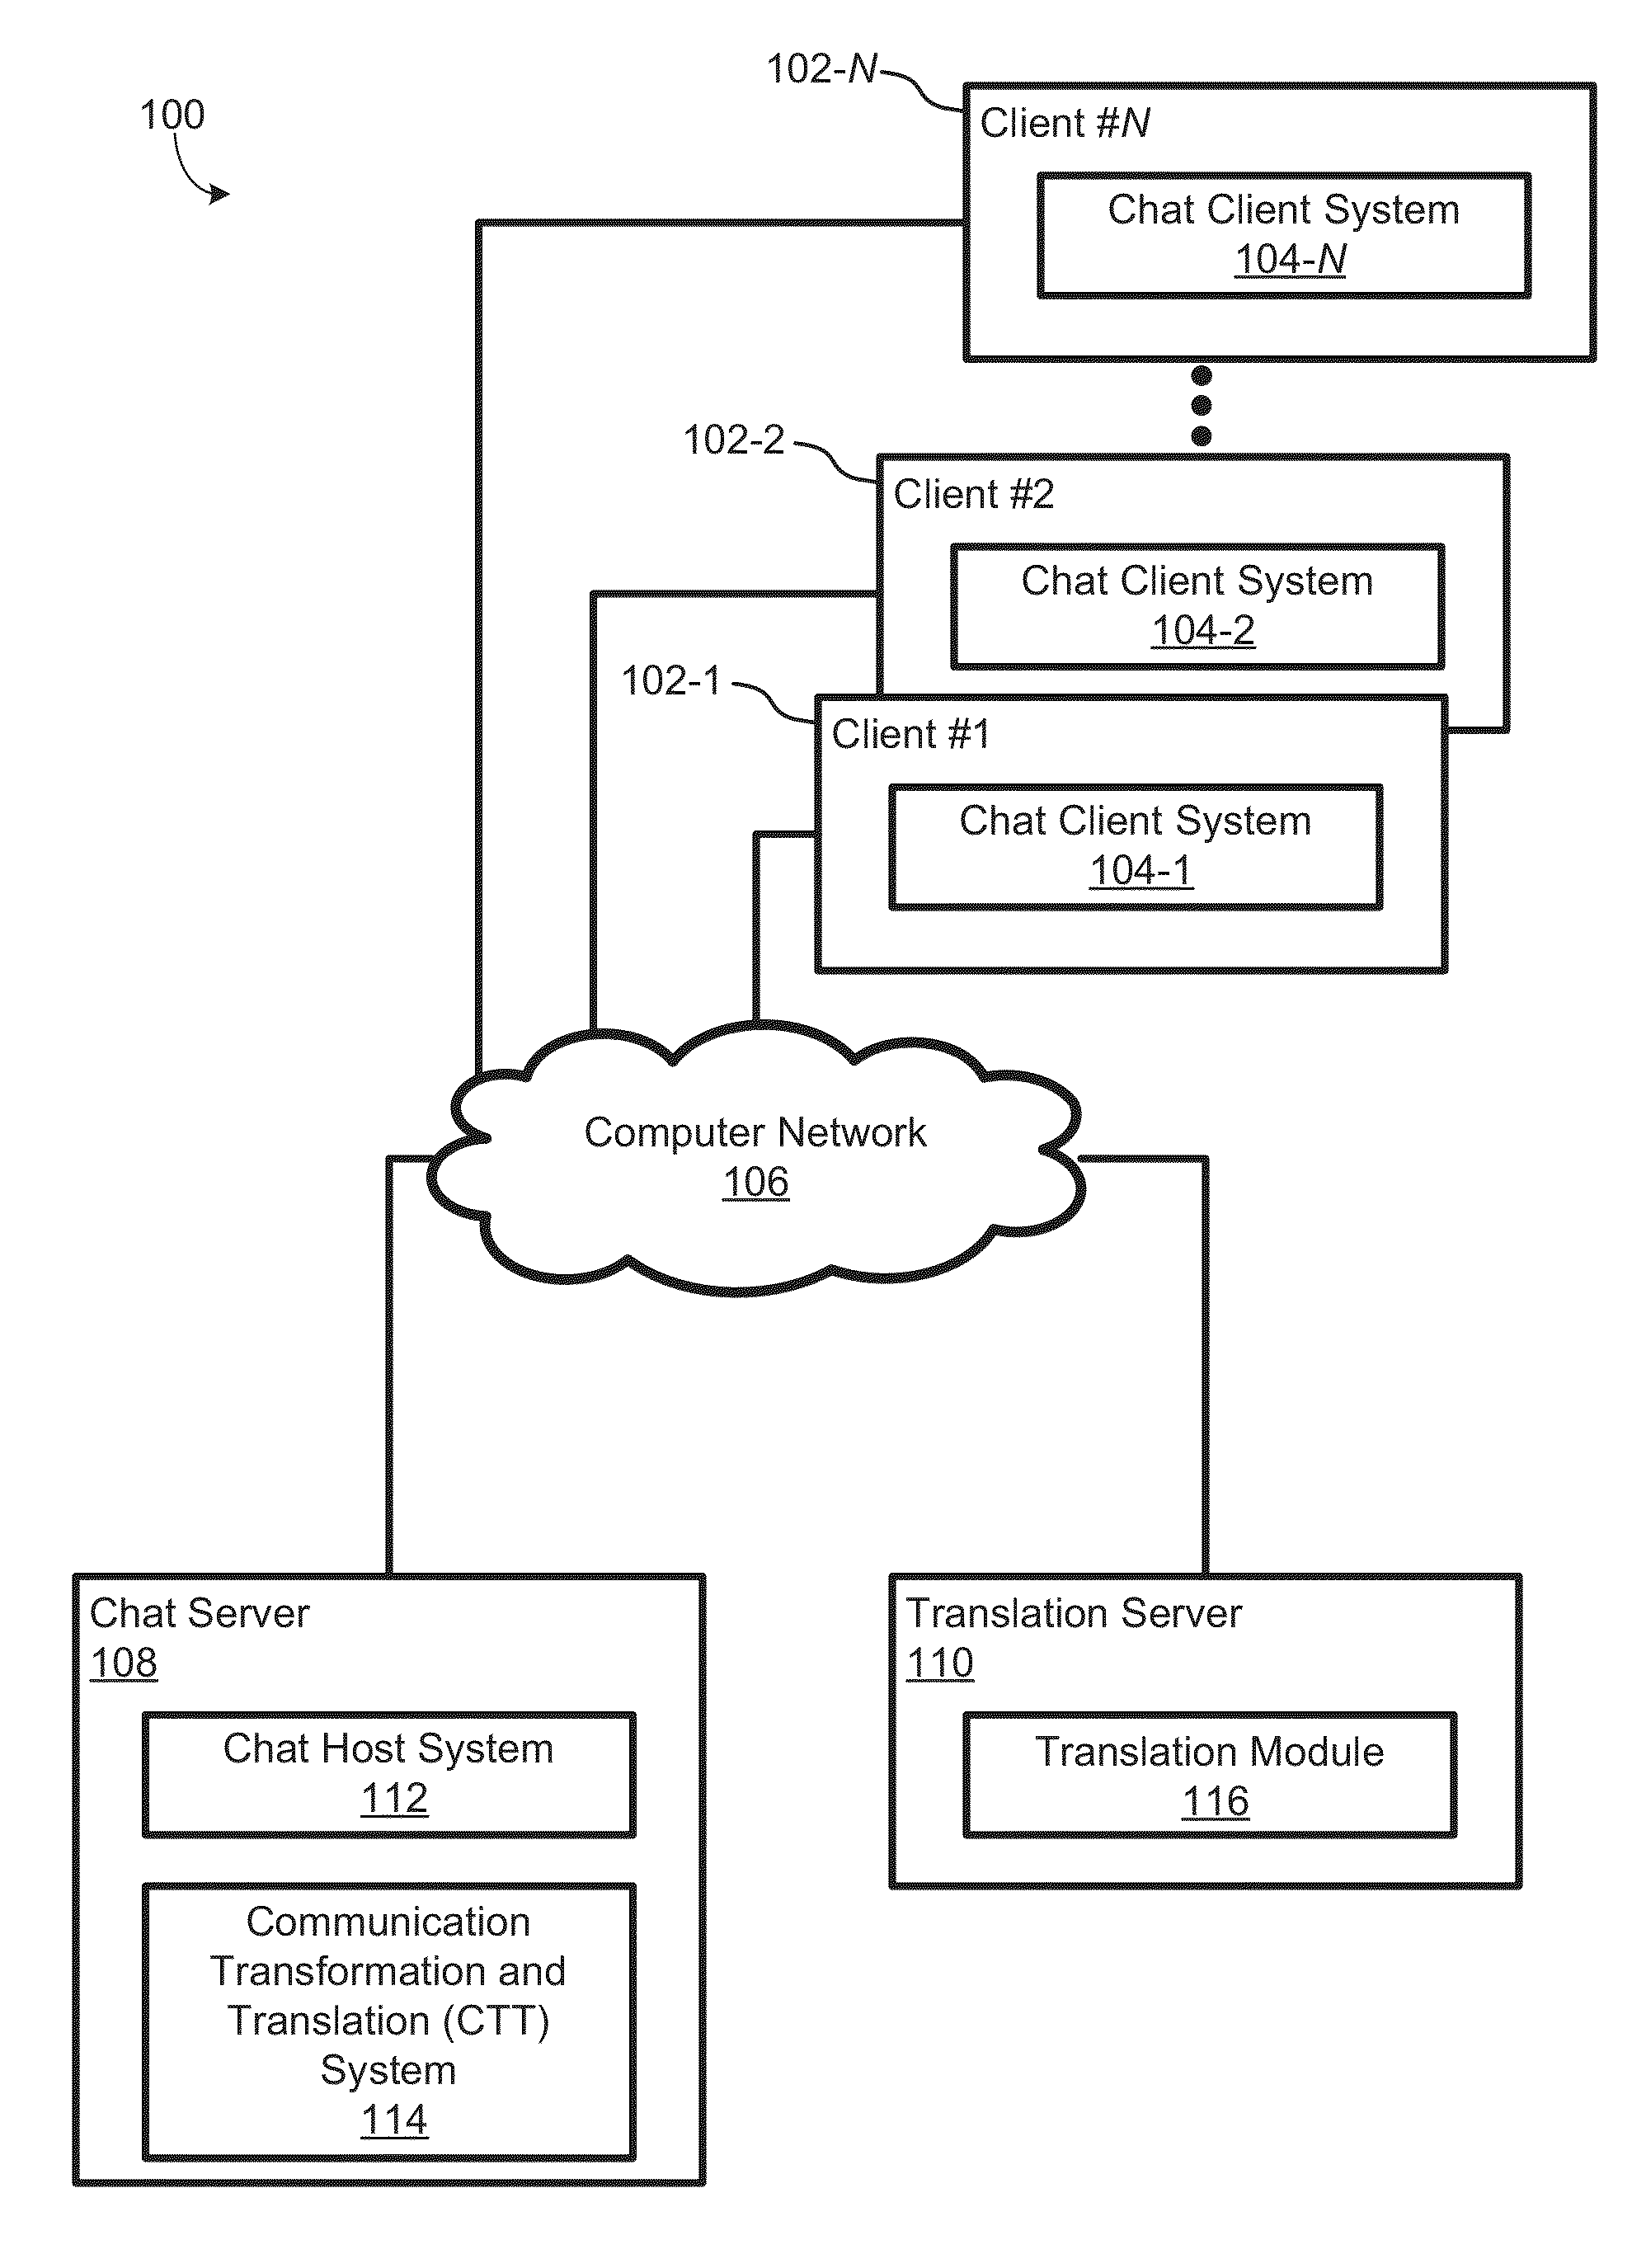 Systems and Methods for Multi-User Multi-Lingual Communications